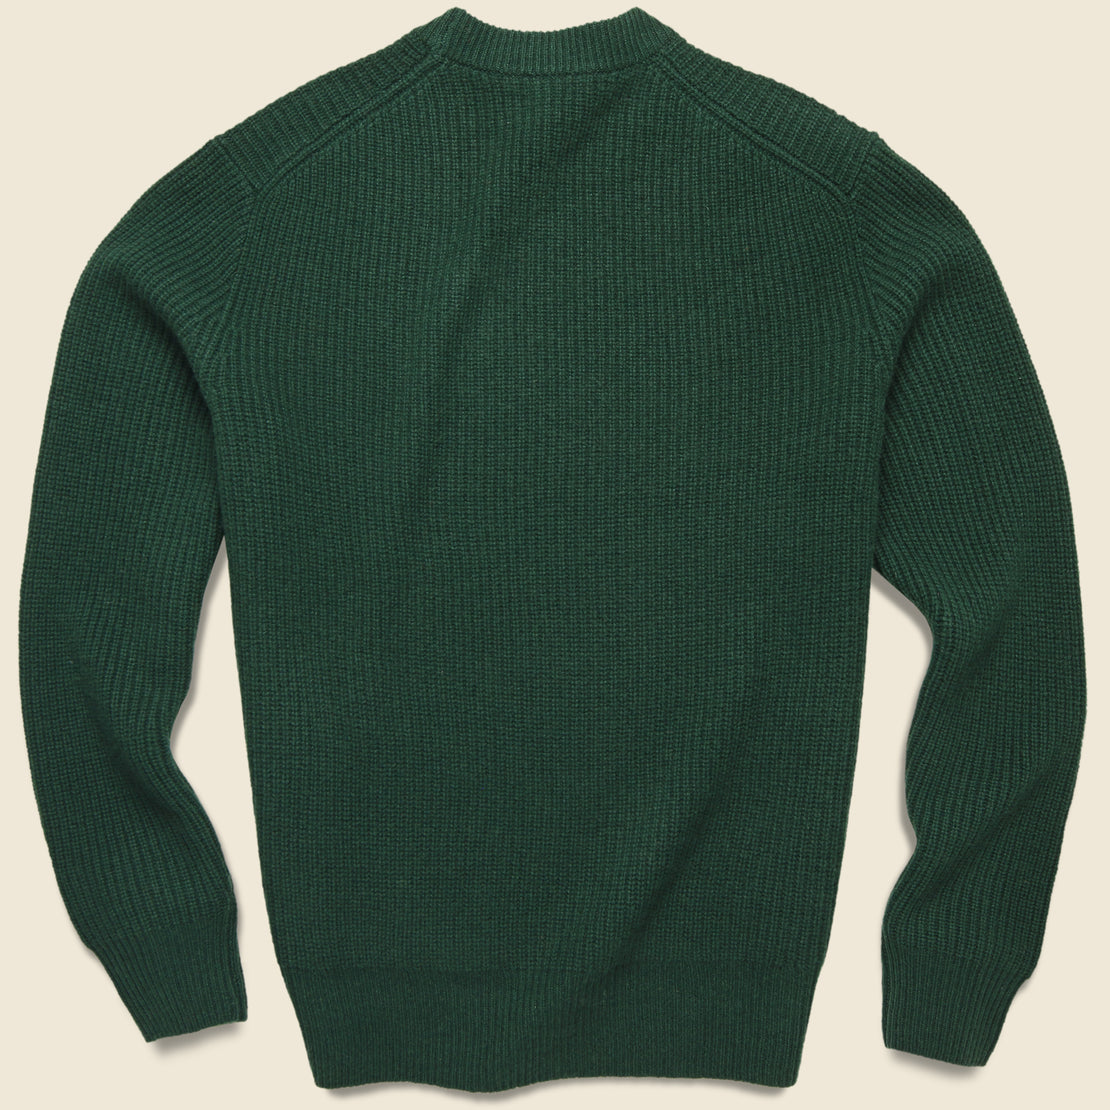 Cashmere Jordan Sweater - Heather Forest - Alex Mill - STAG Provisions - Tops - Sweater